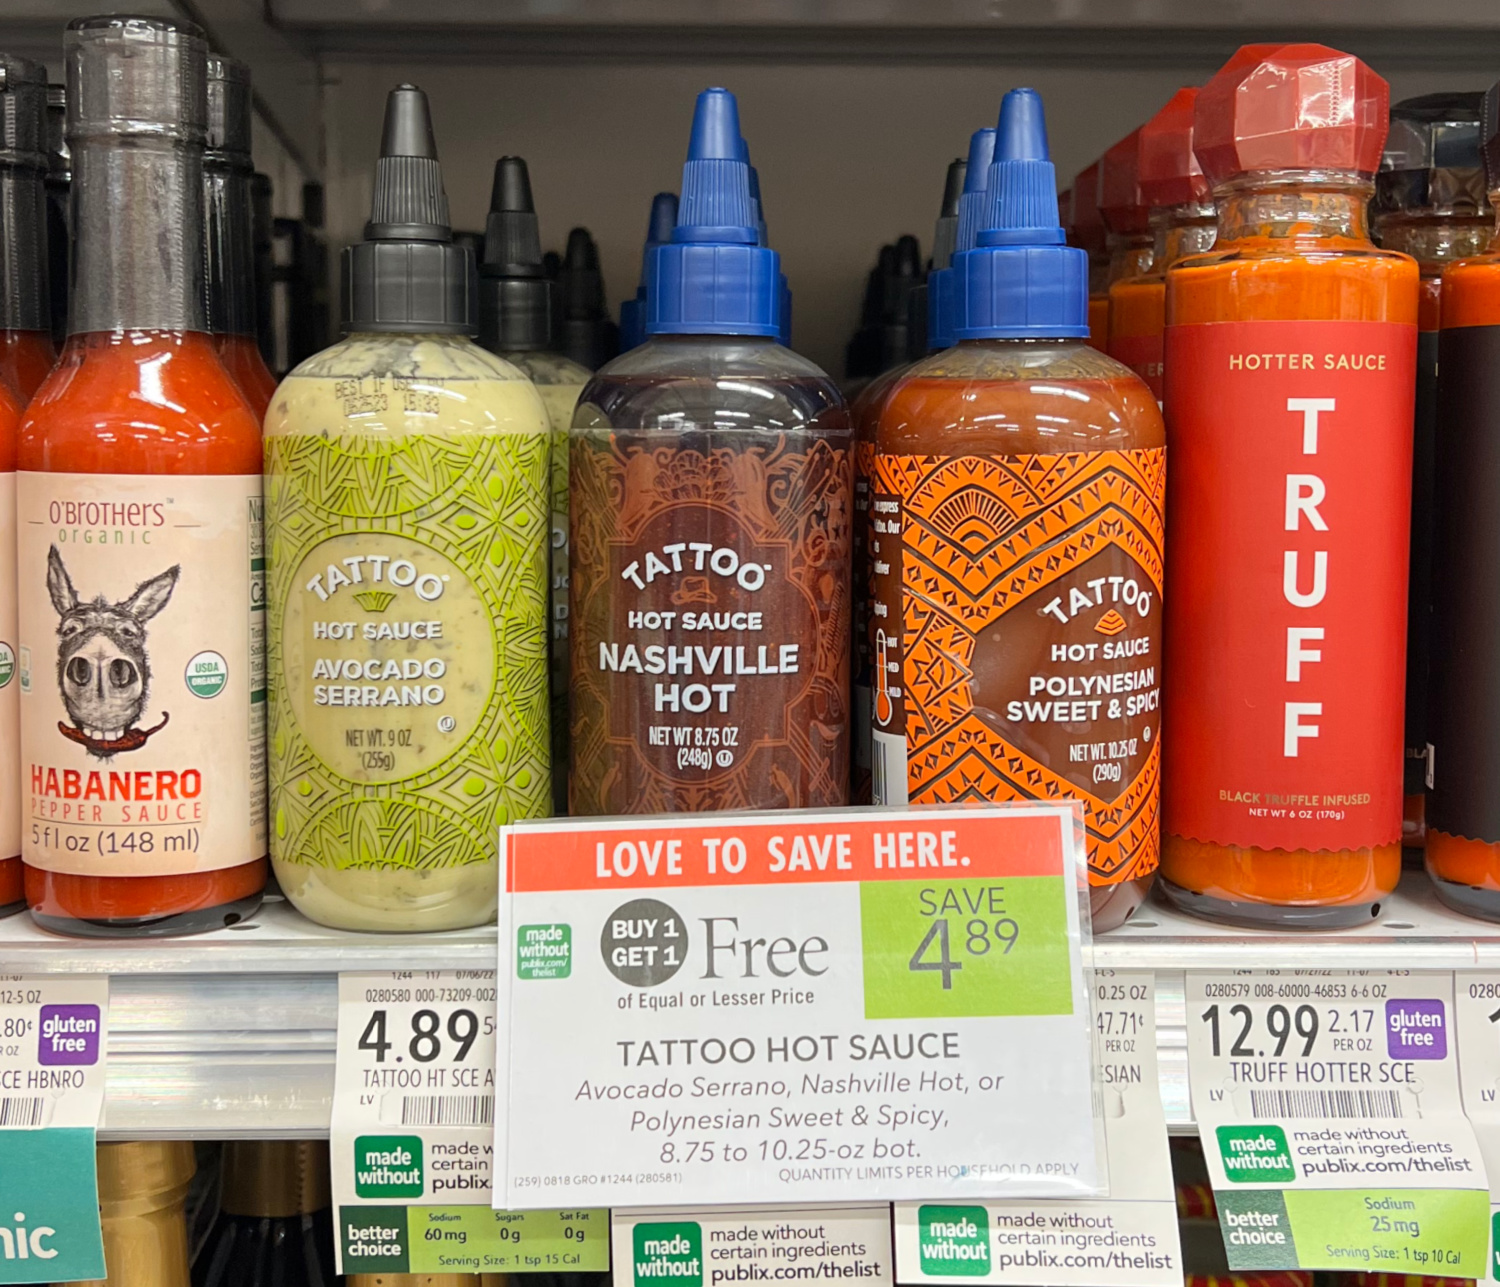 Get a free tattoo of Cholula hot sauce for a chance to win a lifetime supply